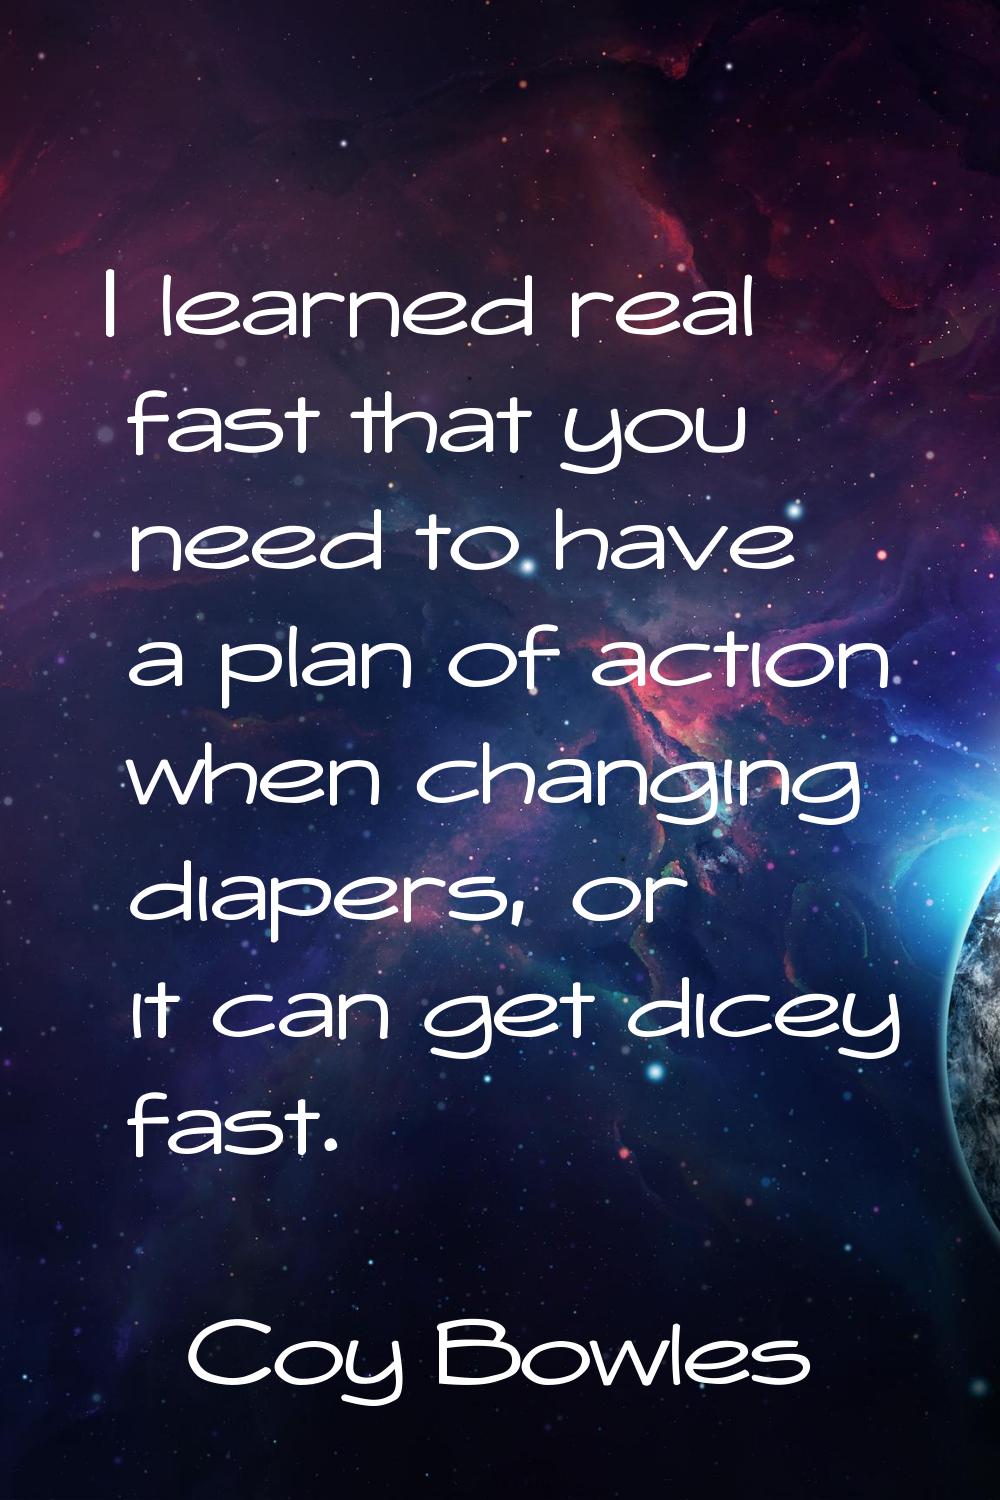 I learned real fast that you need to have a plan of action when changing diapers, or it can get dic